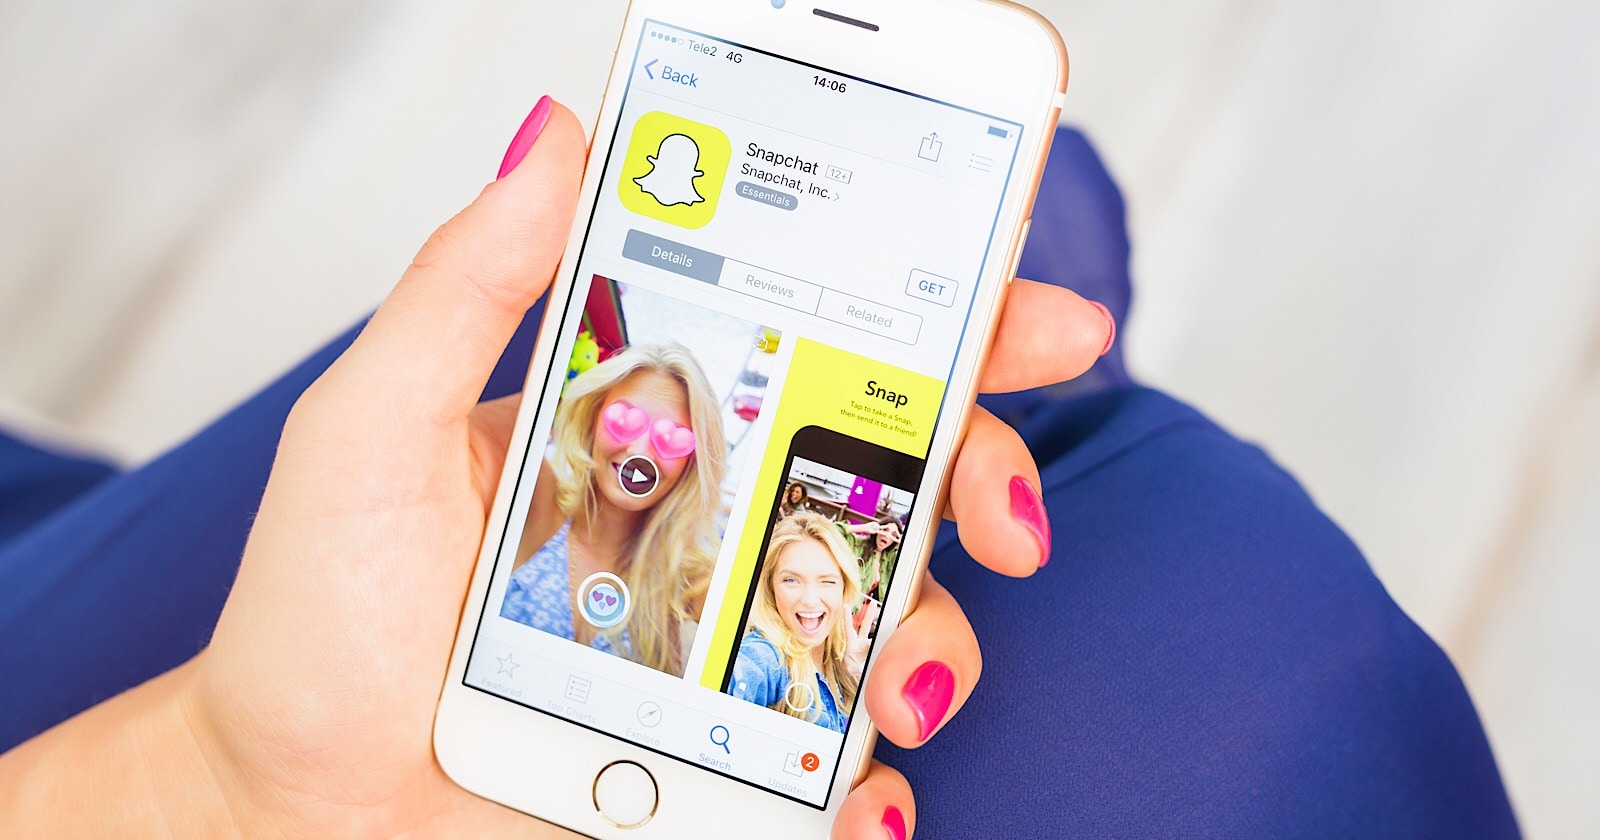 Now You Can Share Links to Snapchat from Third Party Apps on iOS by @MattGSouthern